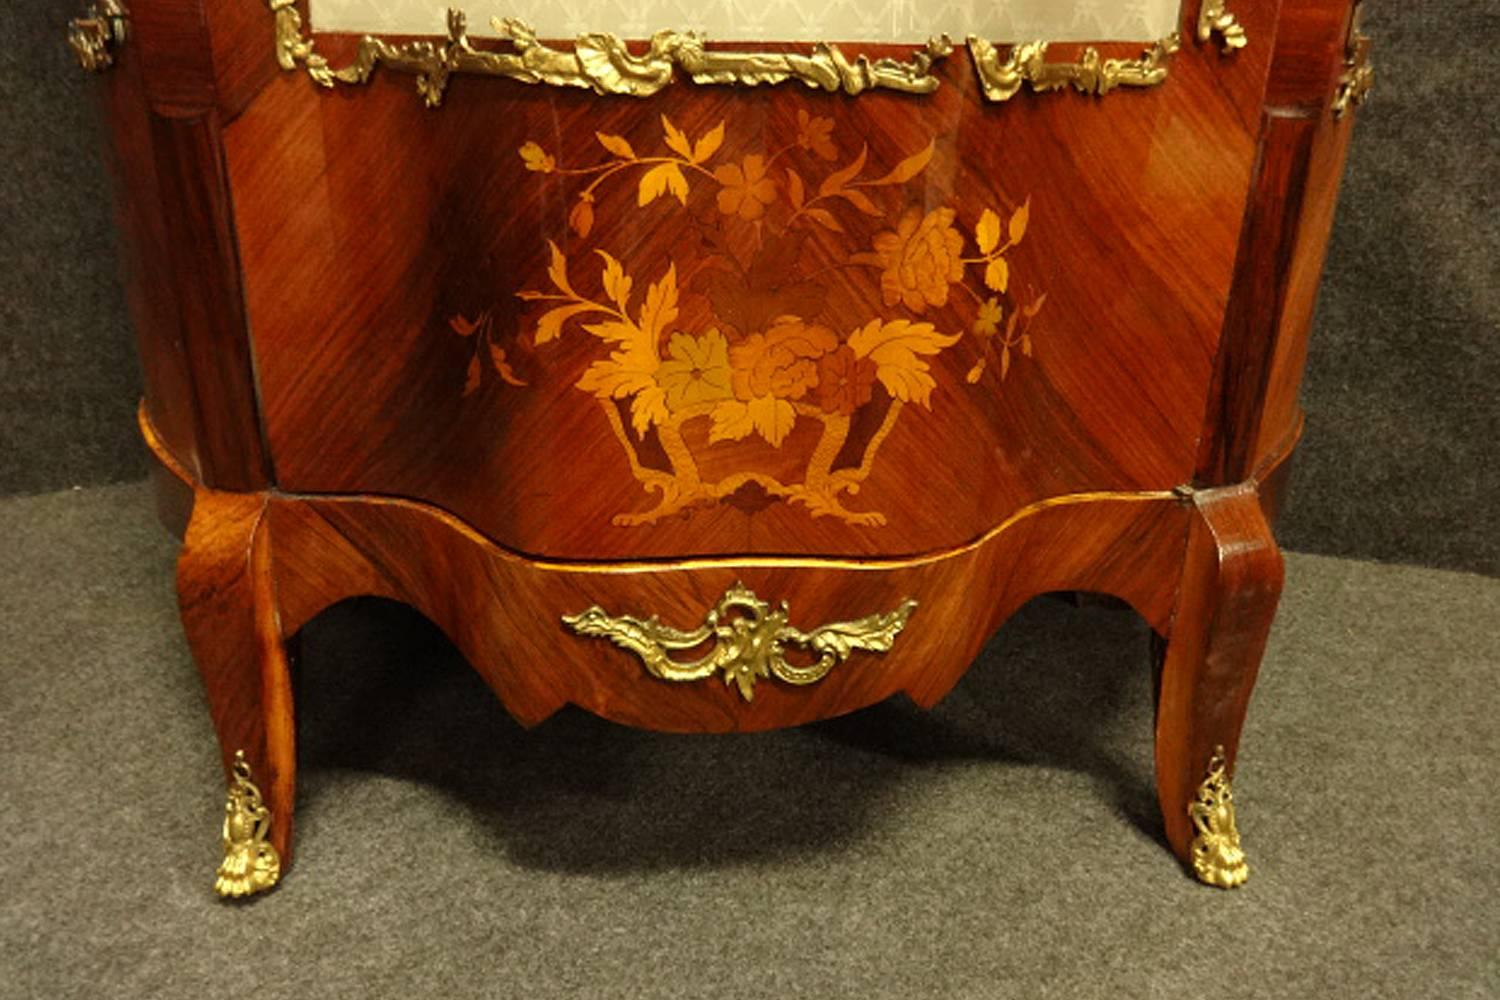 Outstanding Kingwood 19th Century Floral Marquetry Display Vitreen For Sale 1